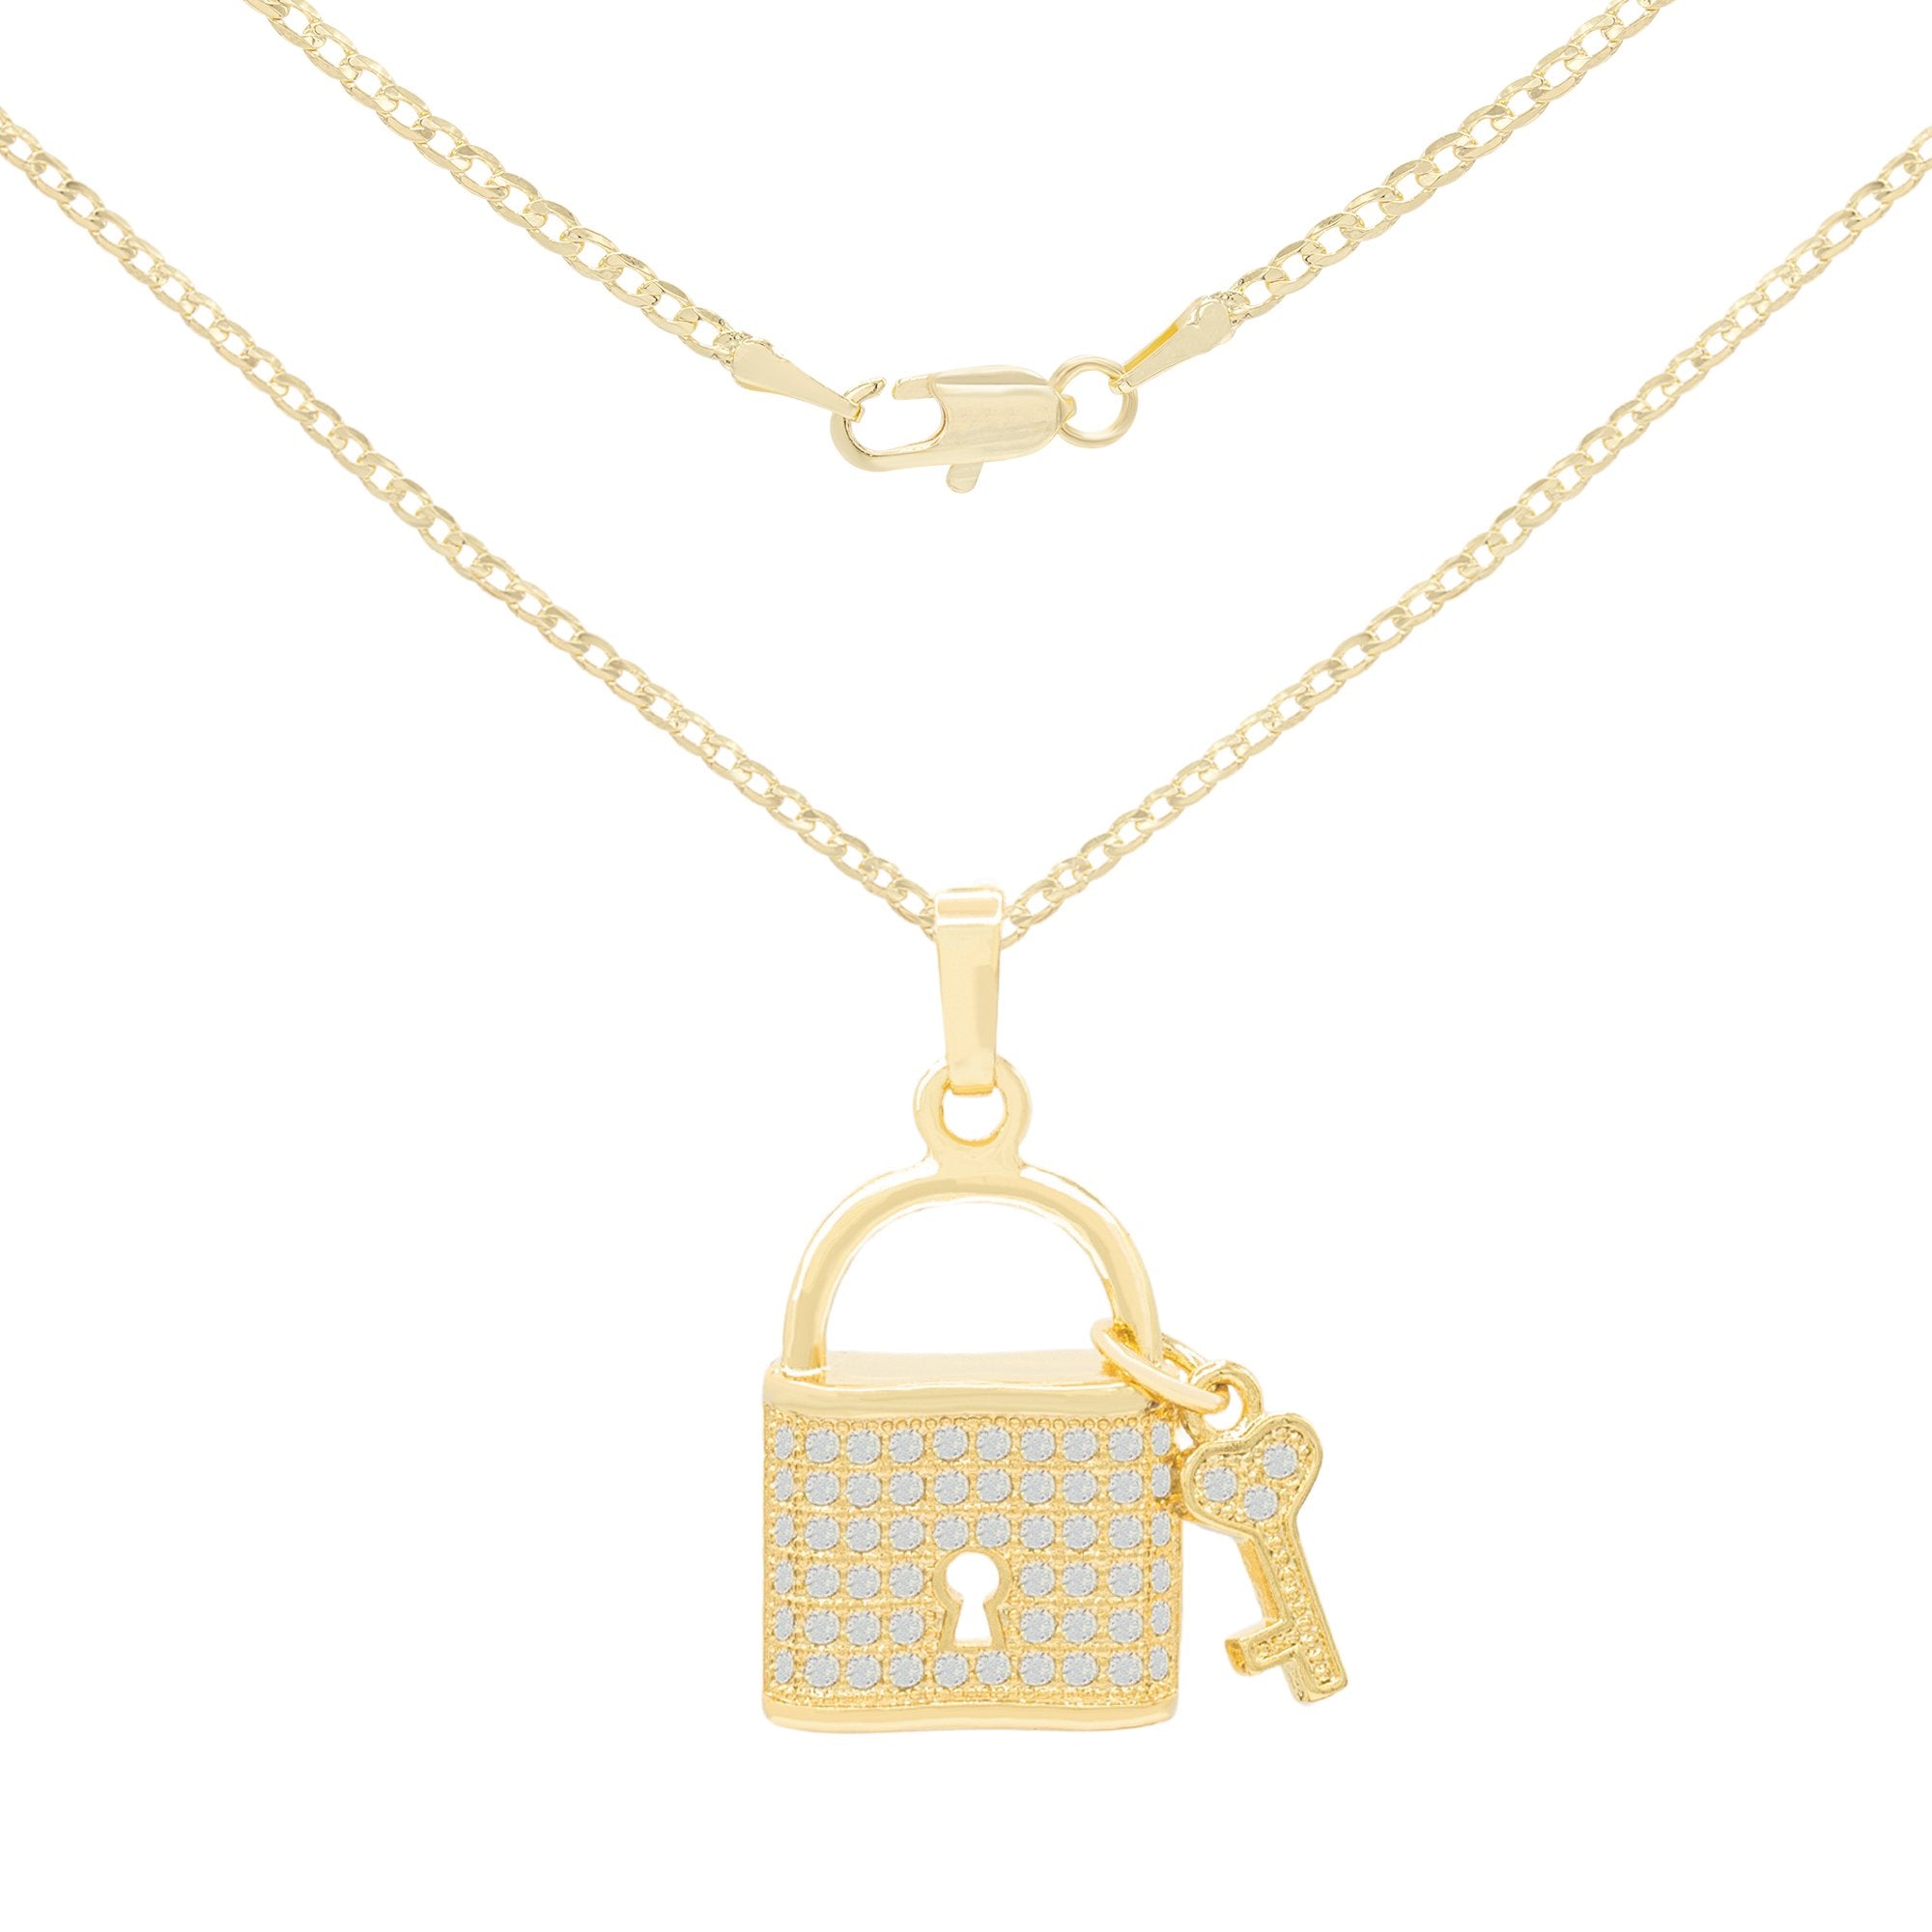 Lock Necklace, Gold Necklaces for Women